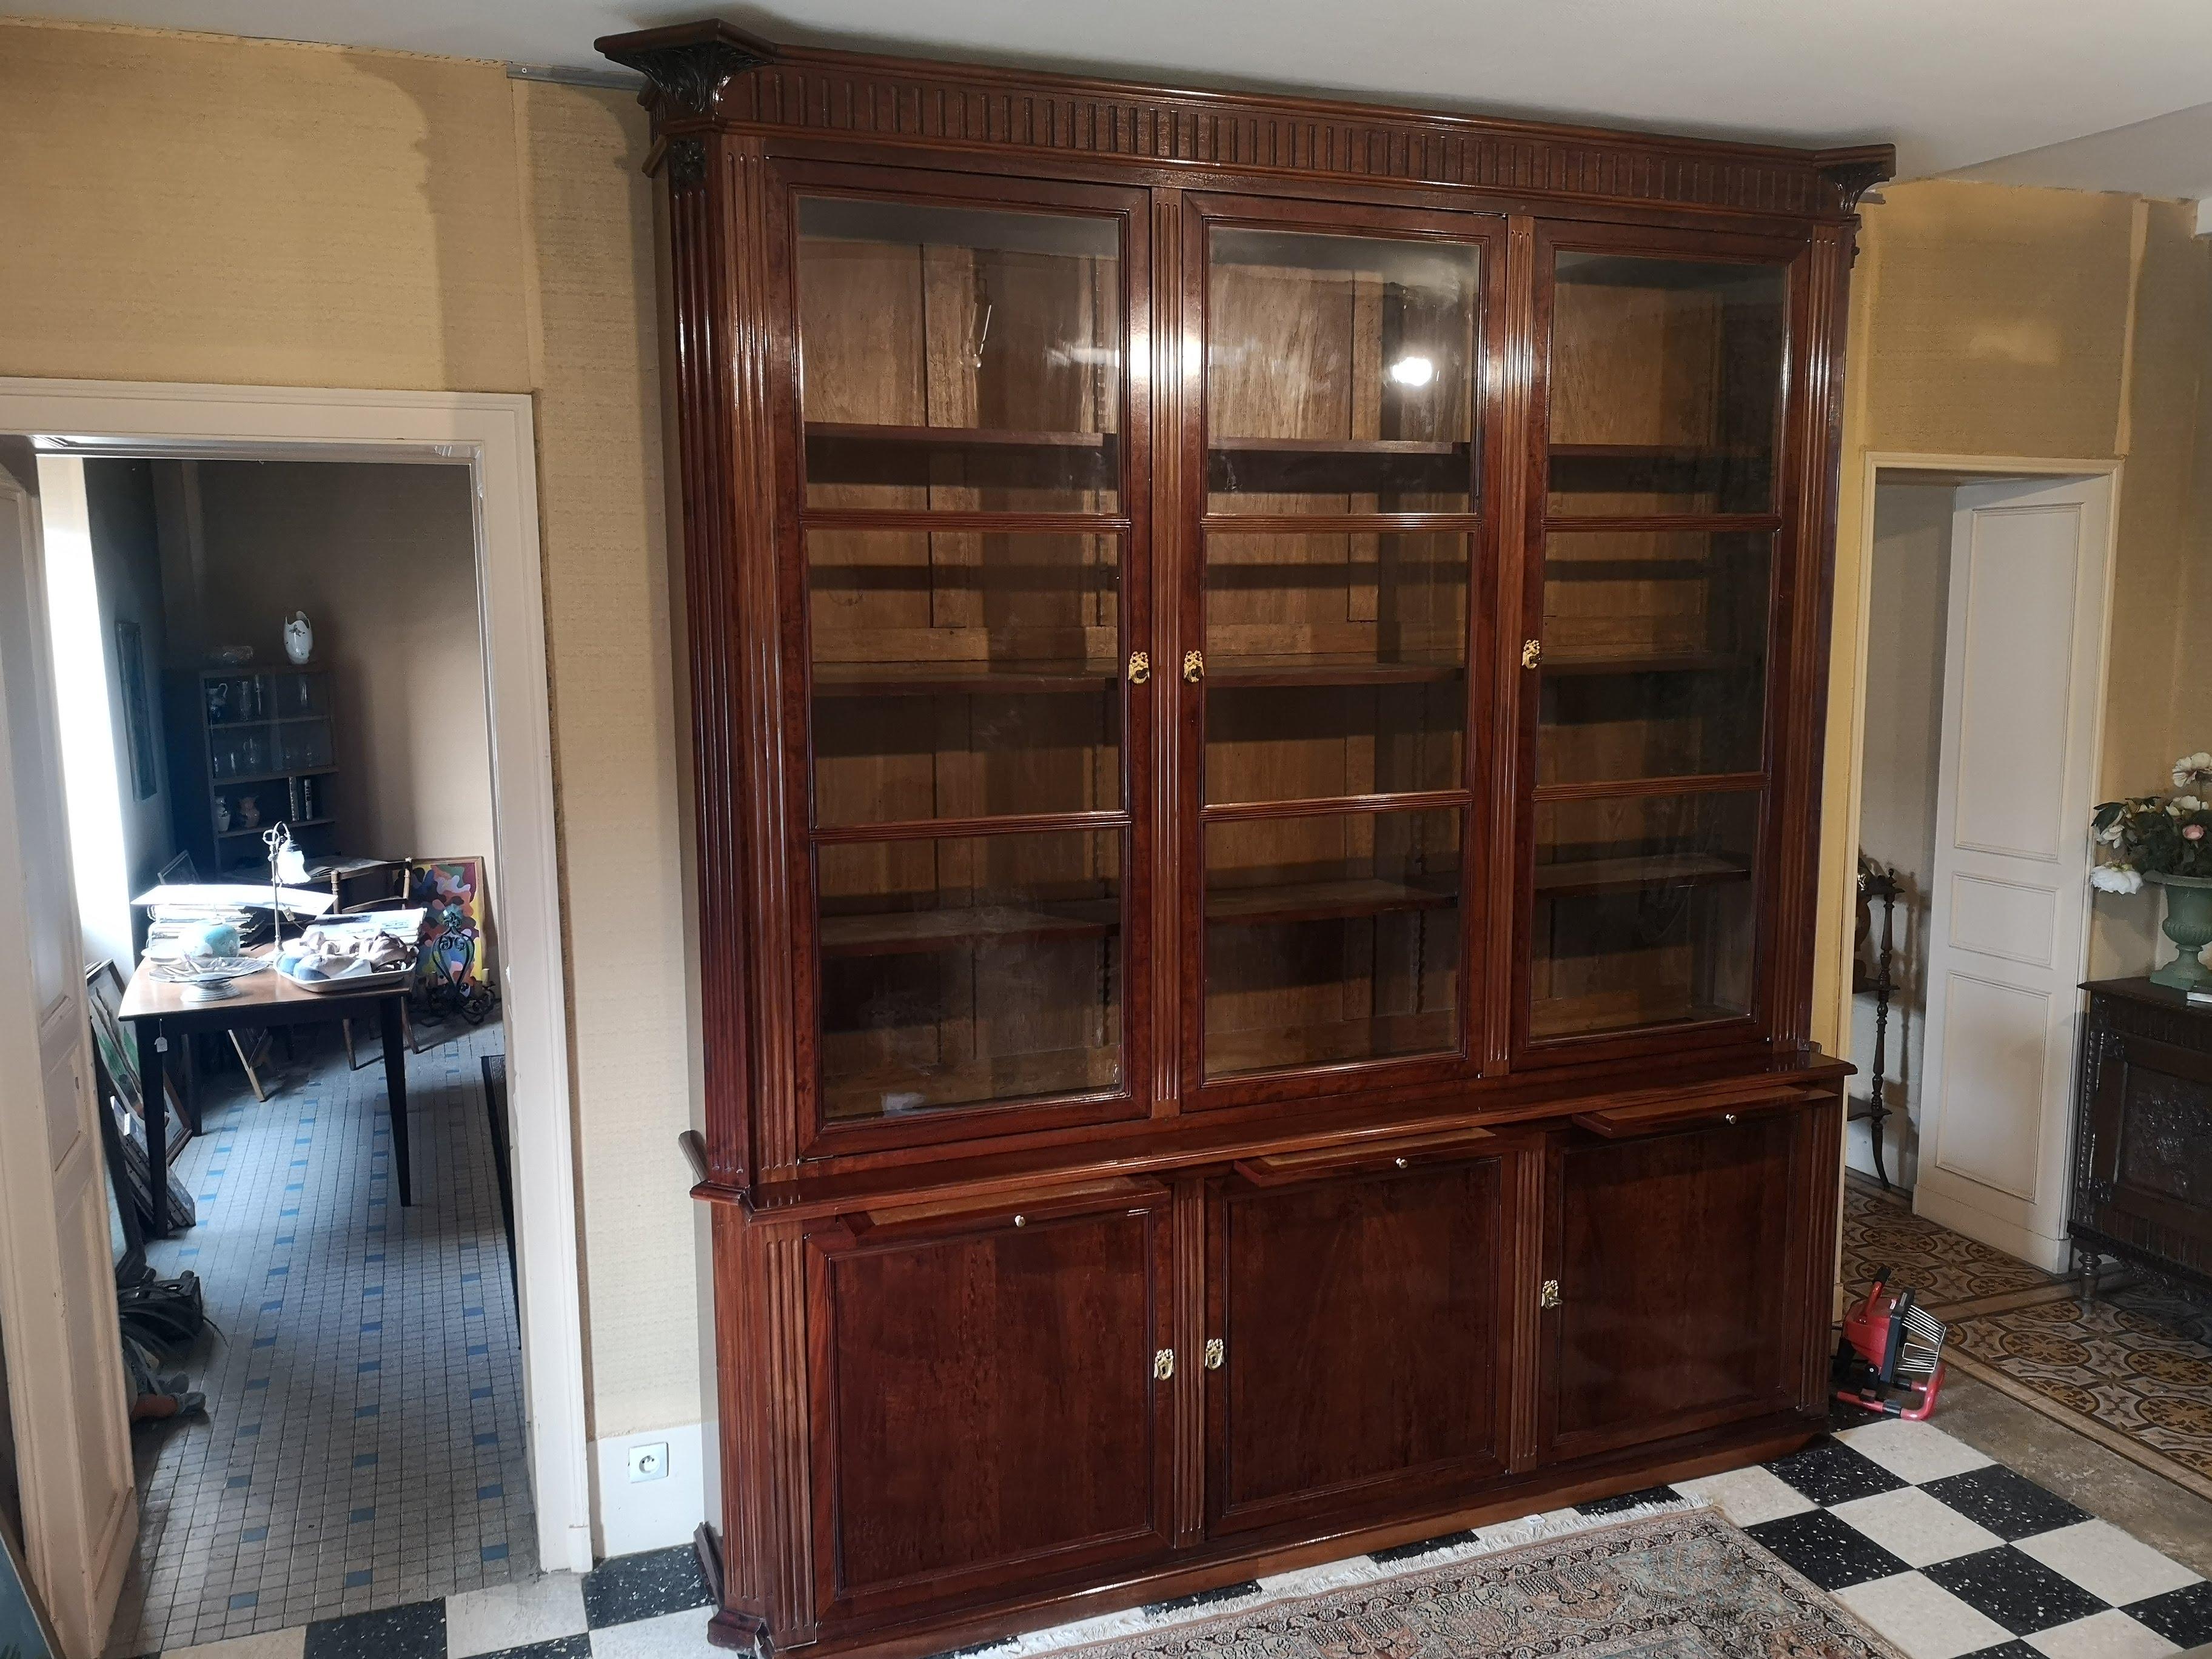 An old library with a staggered body with three large glass doors and solid doors in the lower part.
In belt three zippers decorated with light brown leather with vignette.
The piece of furniture has cut angles, Louis XVI style grooves in the